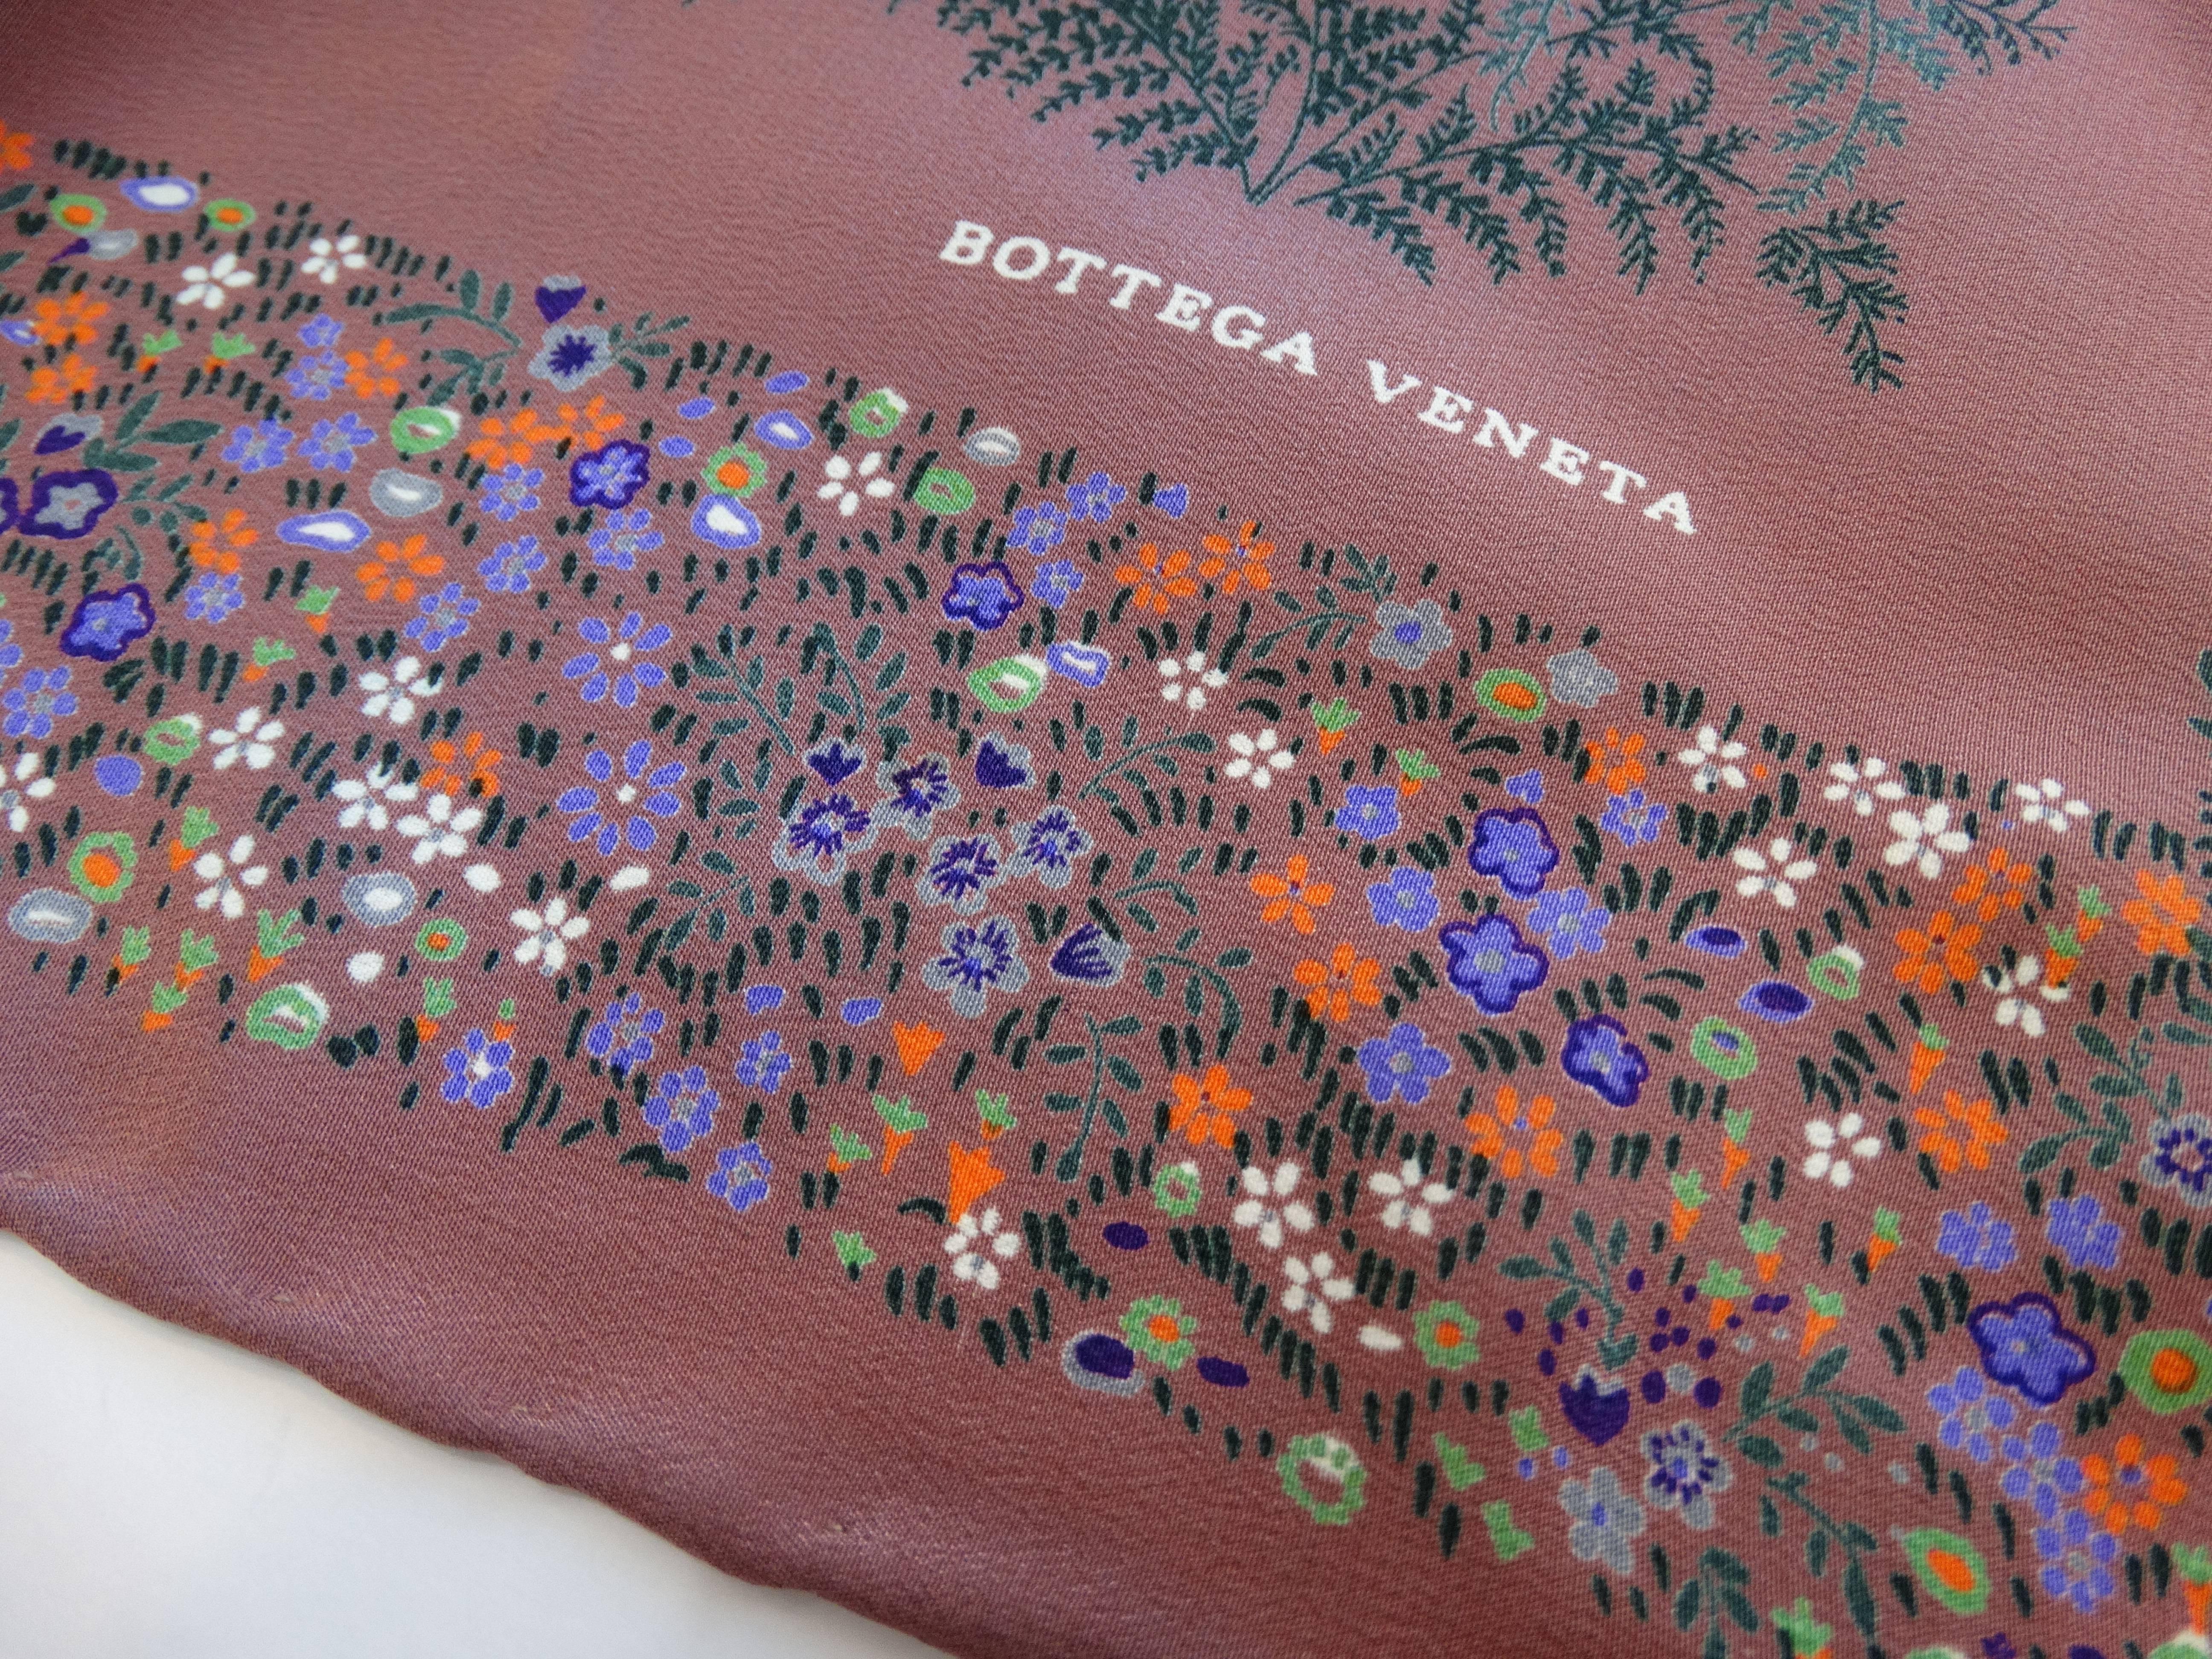 Amazing floral printed scarf from designer Bottega Veneta! Amazing mauve colored silk printed with intricate ditsy florals and an image of a woman coming out of the water in the center. Accented with dreamy sunset colors, pale oranges and yellows.